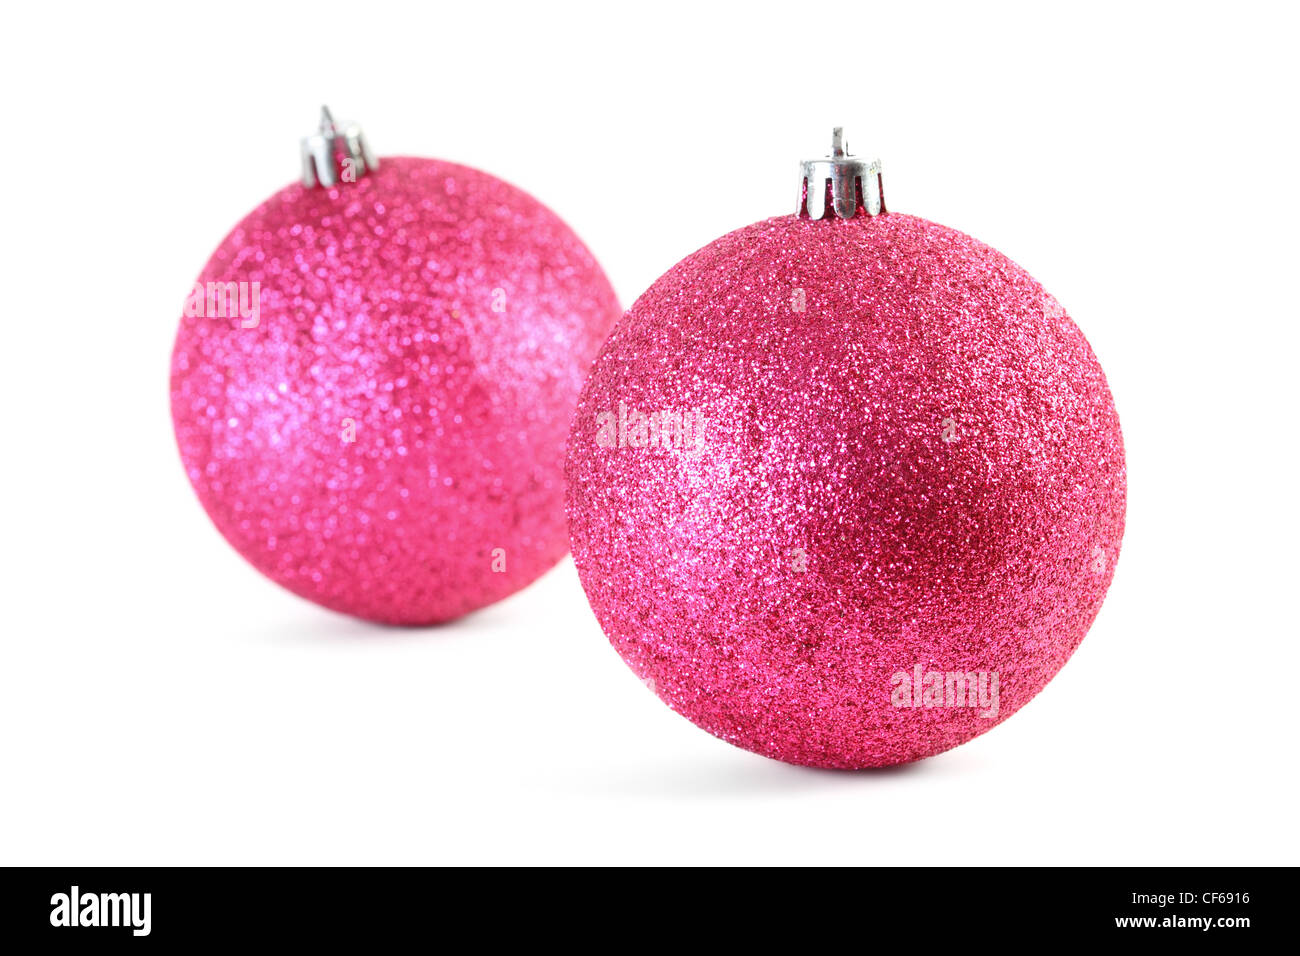 Two red Christmas tree balls isolated on white, focus on front ball Stock Photo